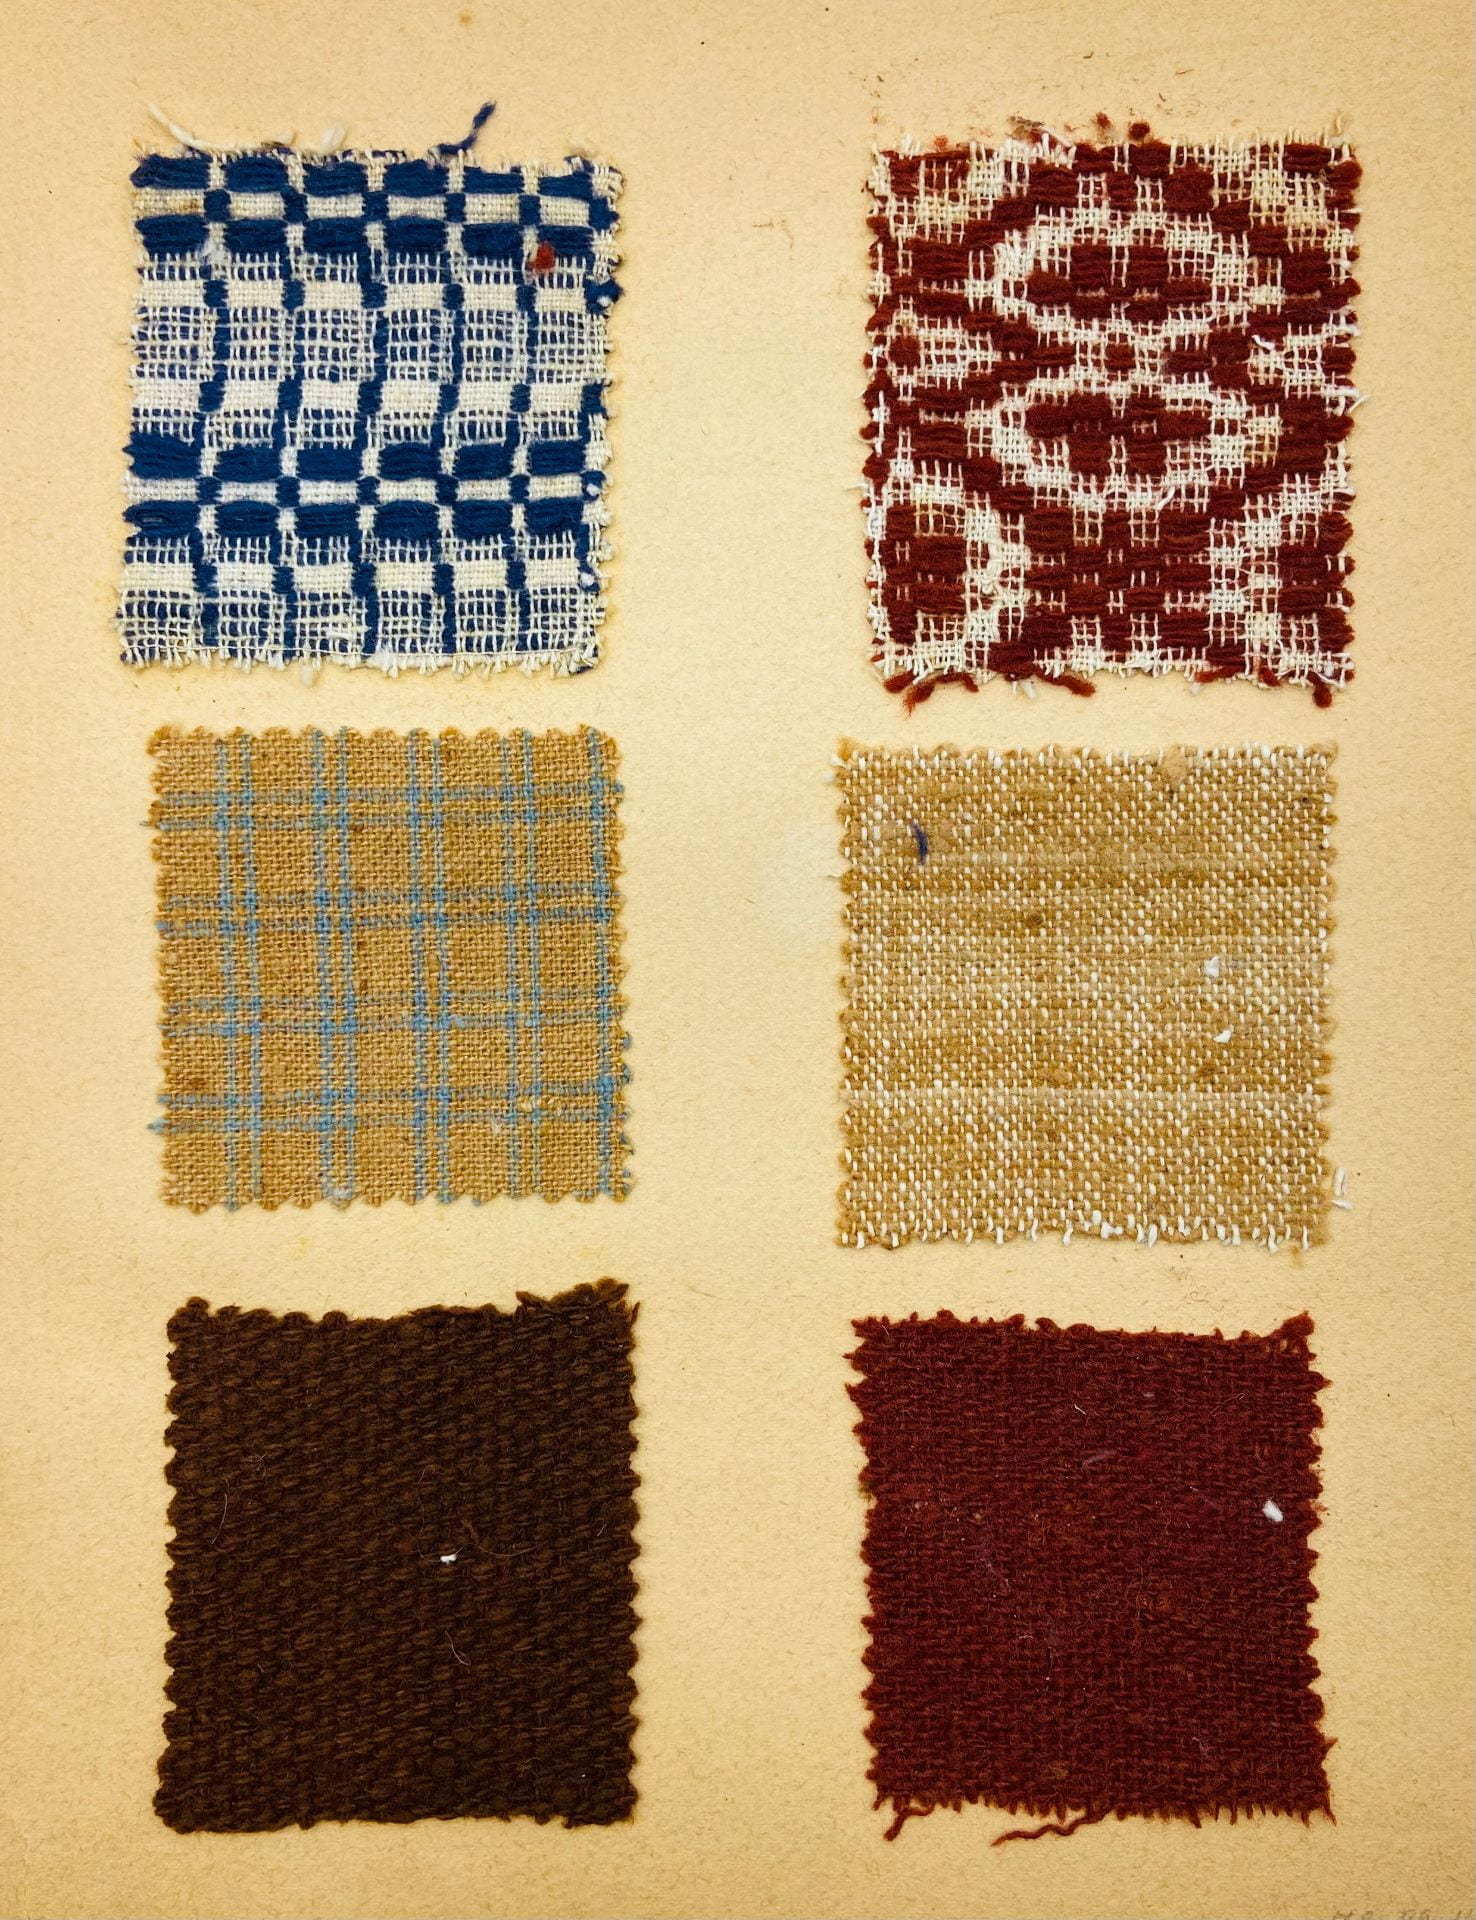 A faded page with six fabric samples cut in squares and adhered to the paper. Each is a different color, from blue and white to red and features a different pattern or weaving technique. 